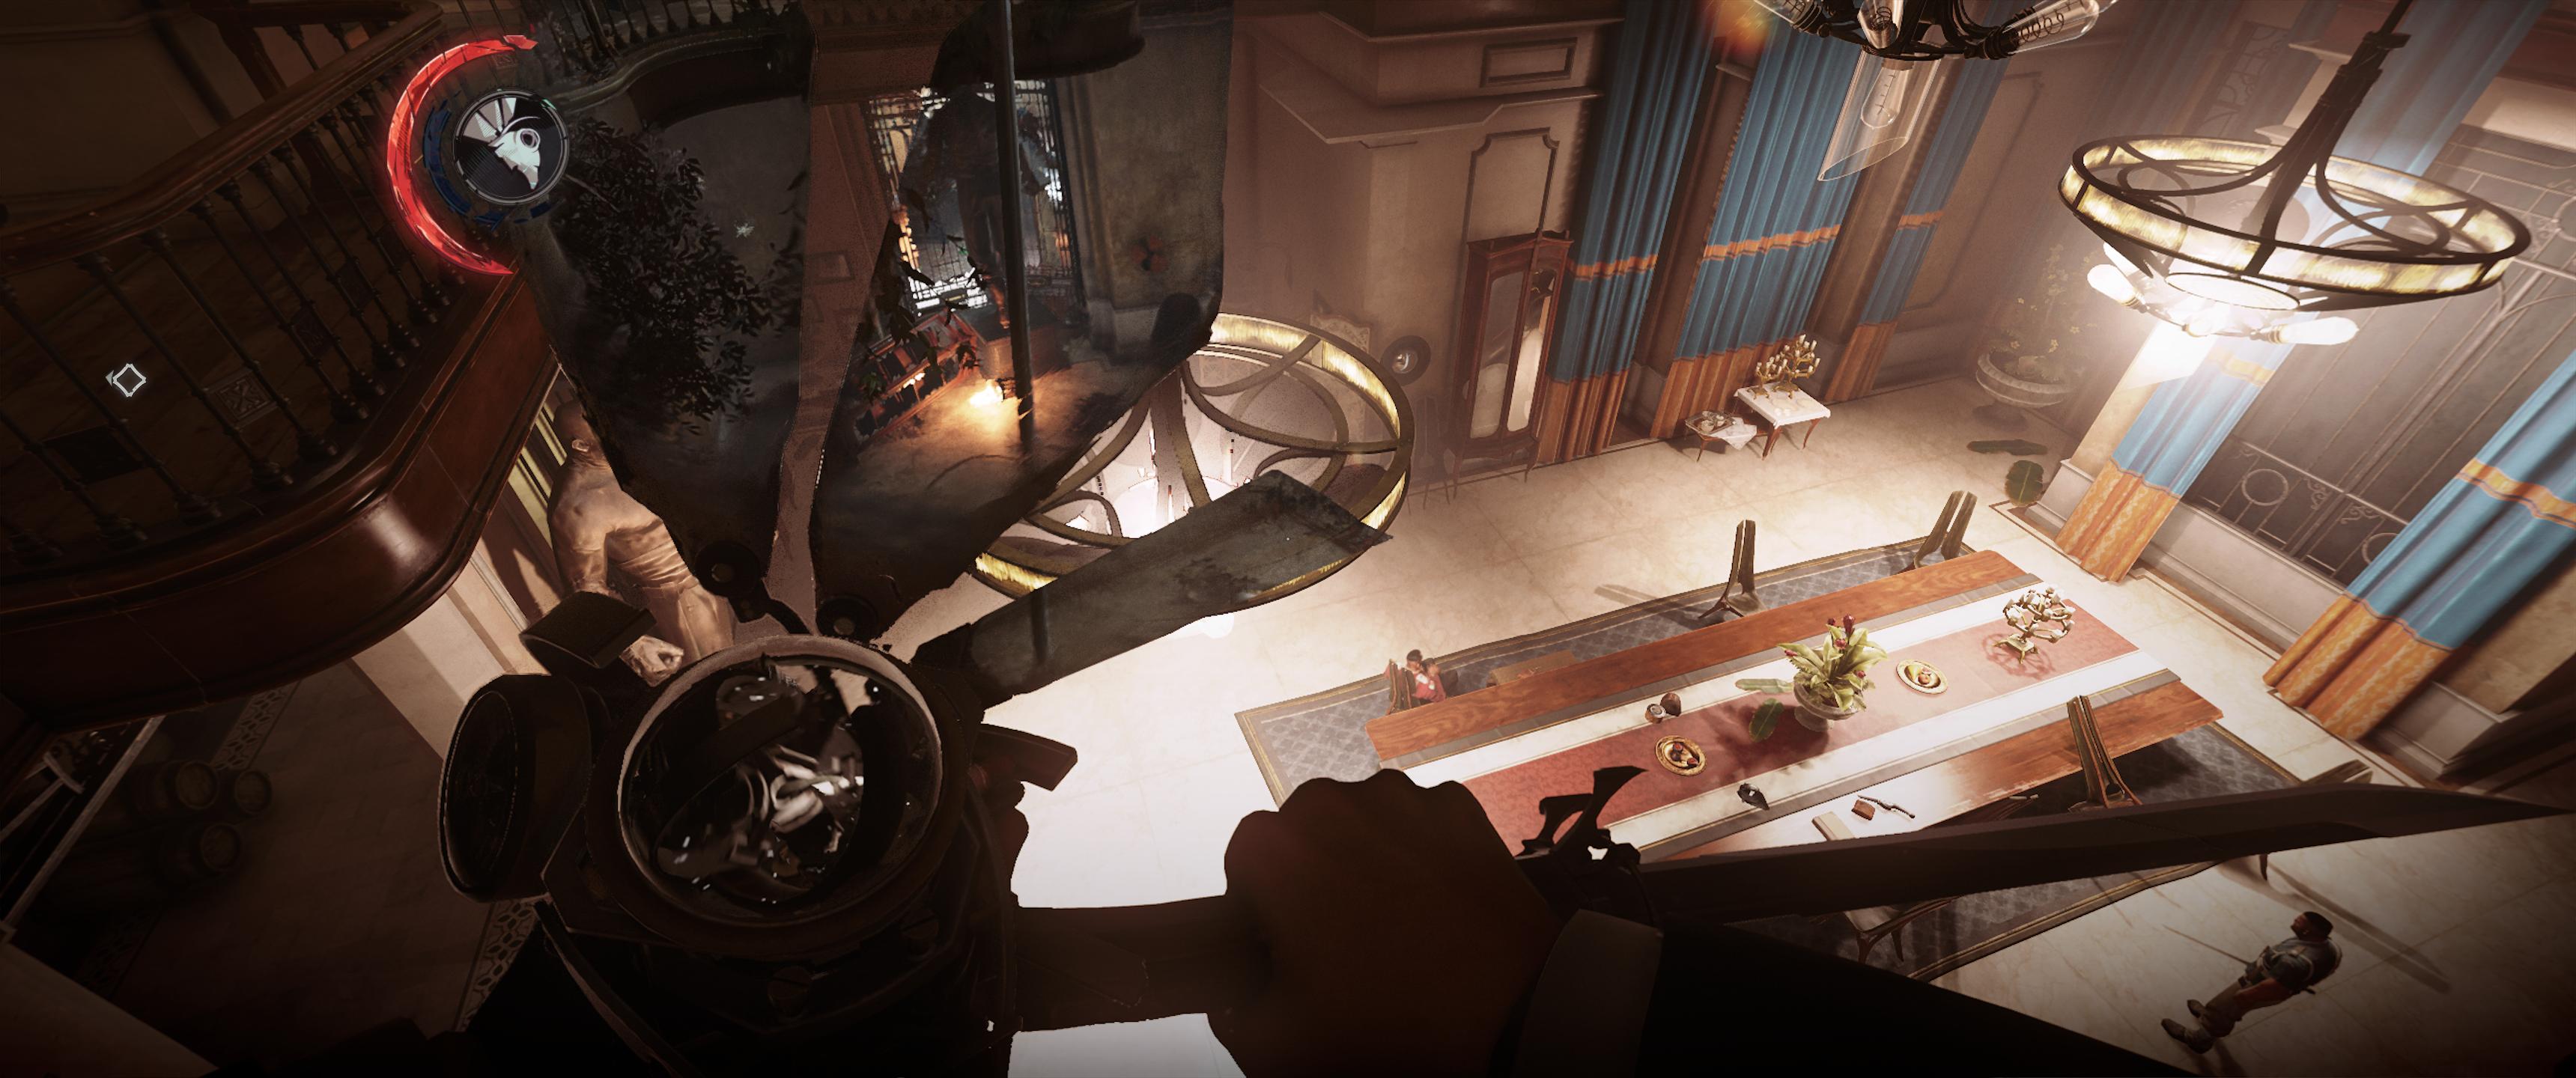 Review: Dishonored 2 (PC) – PC & Video Gaming Examiner